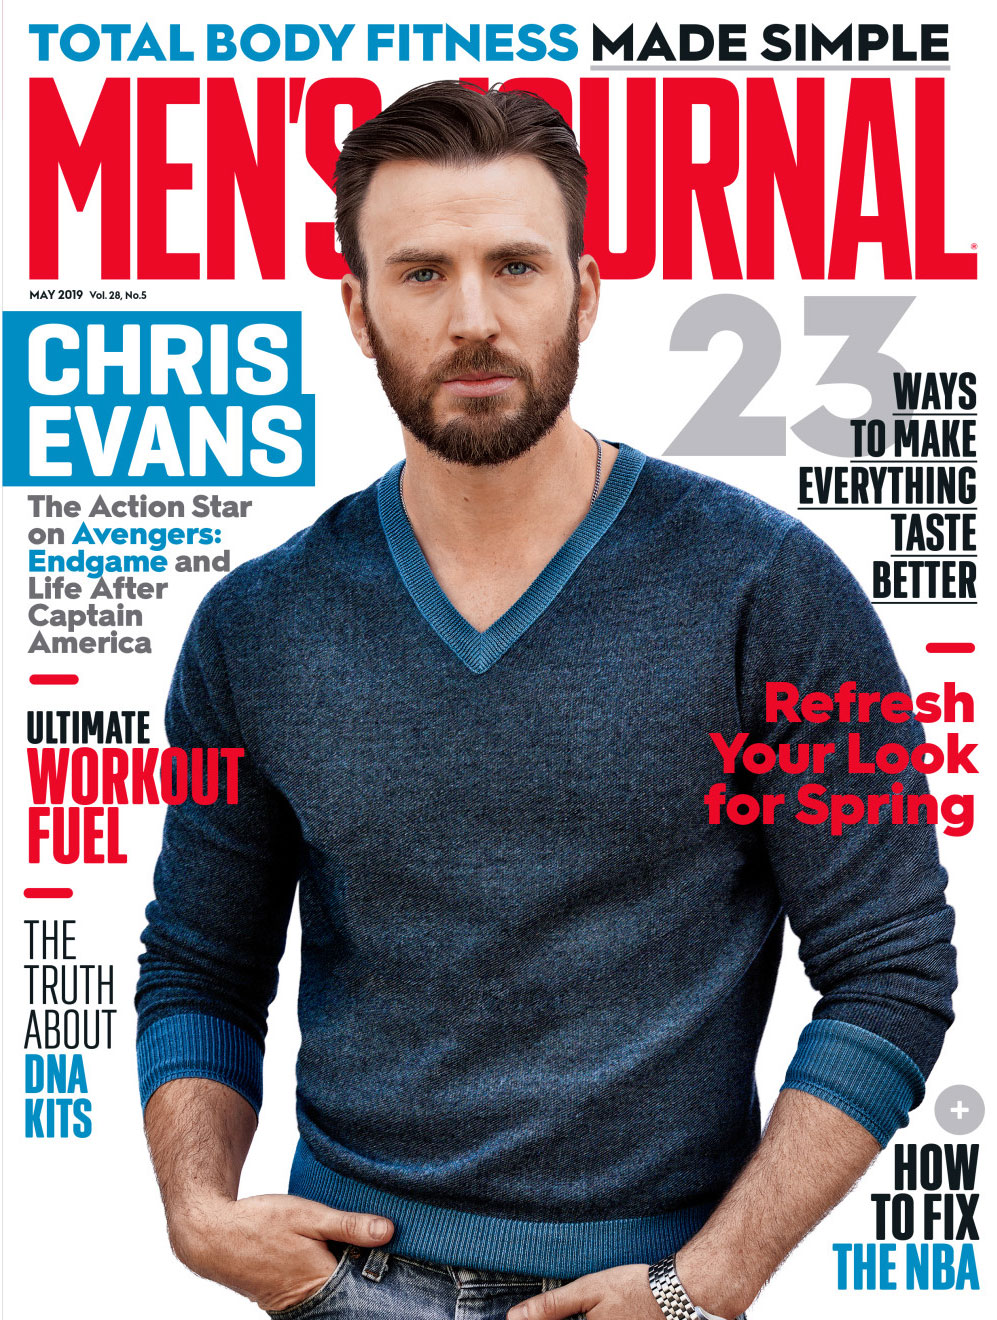 chris-evans-cover-may-issue-mens-journal